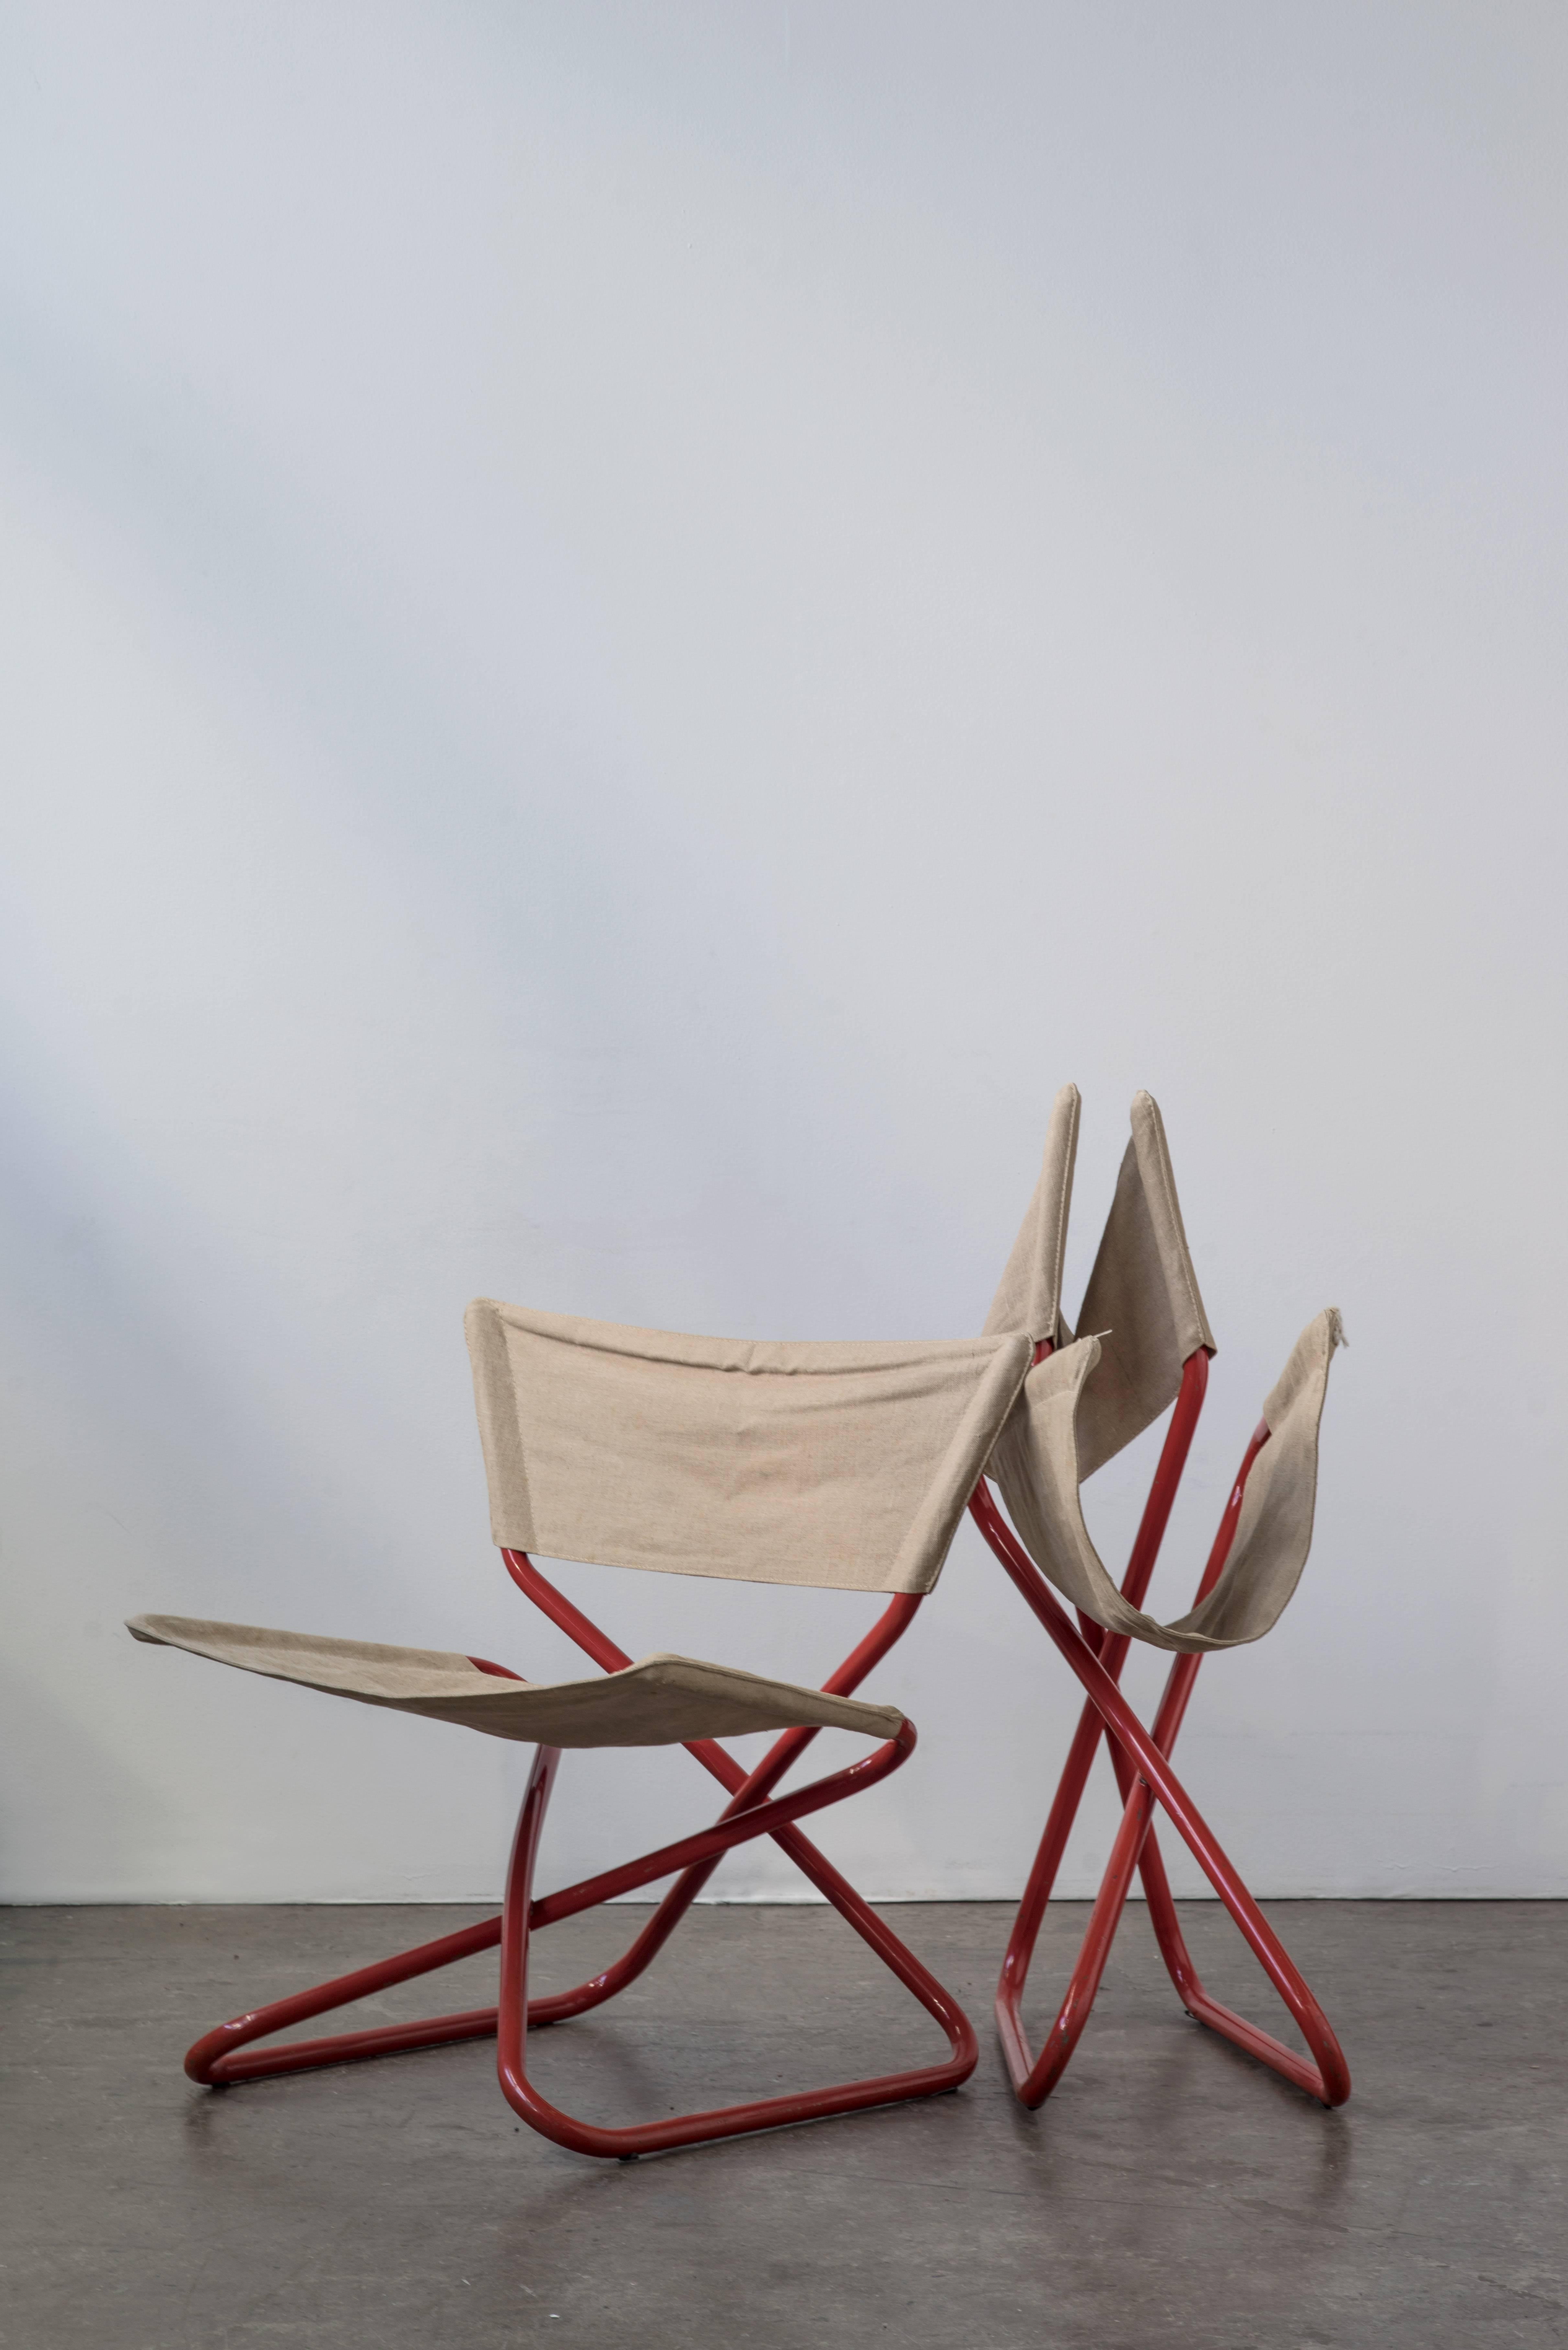 Pair of folding Z-down lounge chairs by Erik Magnussen in red lacquered tubular steel frames with canvas seat covers.

Durable, comfortable and practical with a little bit of a rocker effect in the seats as you sit. 

Could be used indoors or